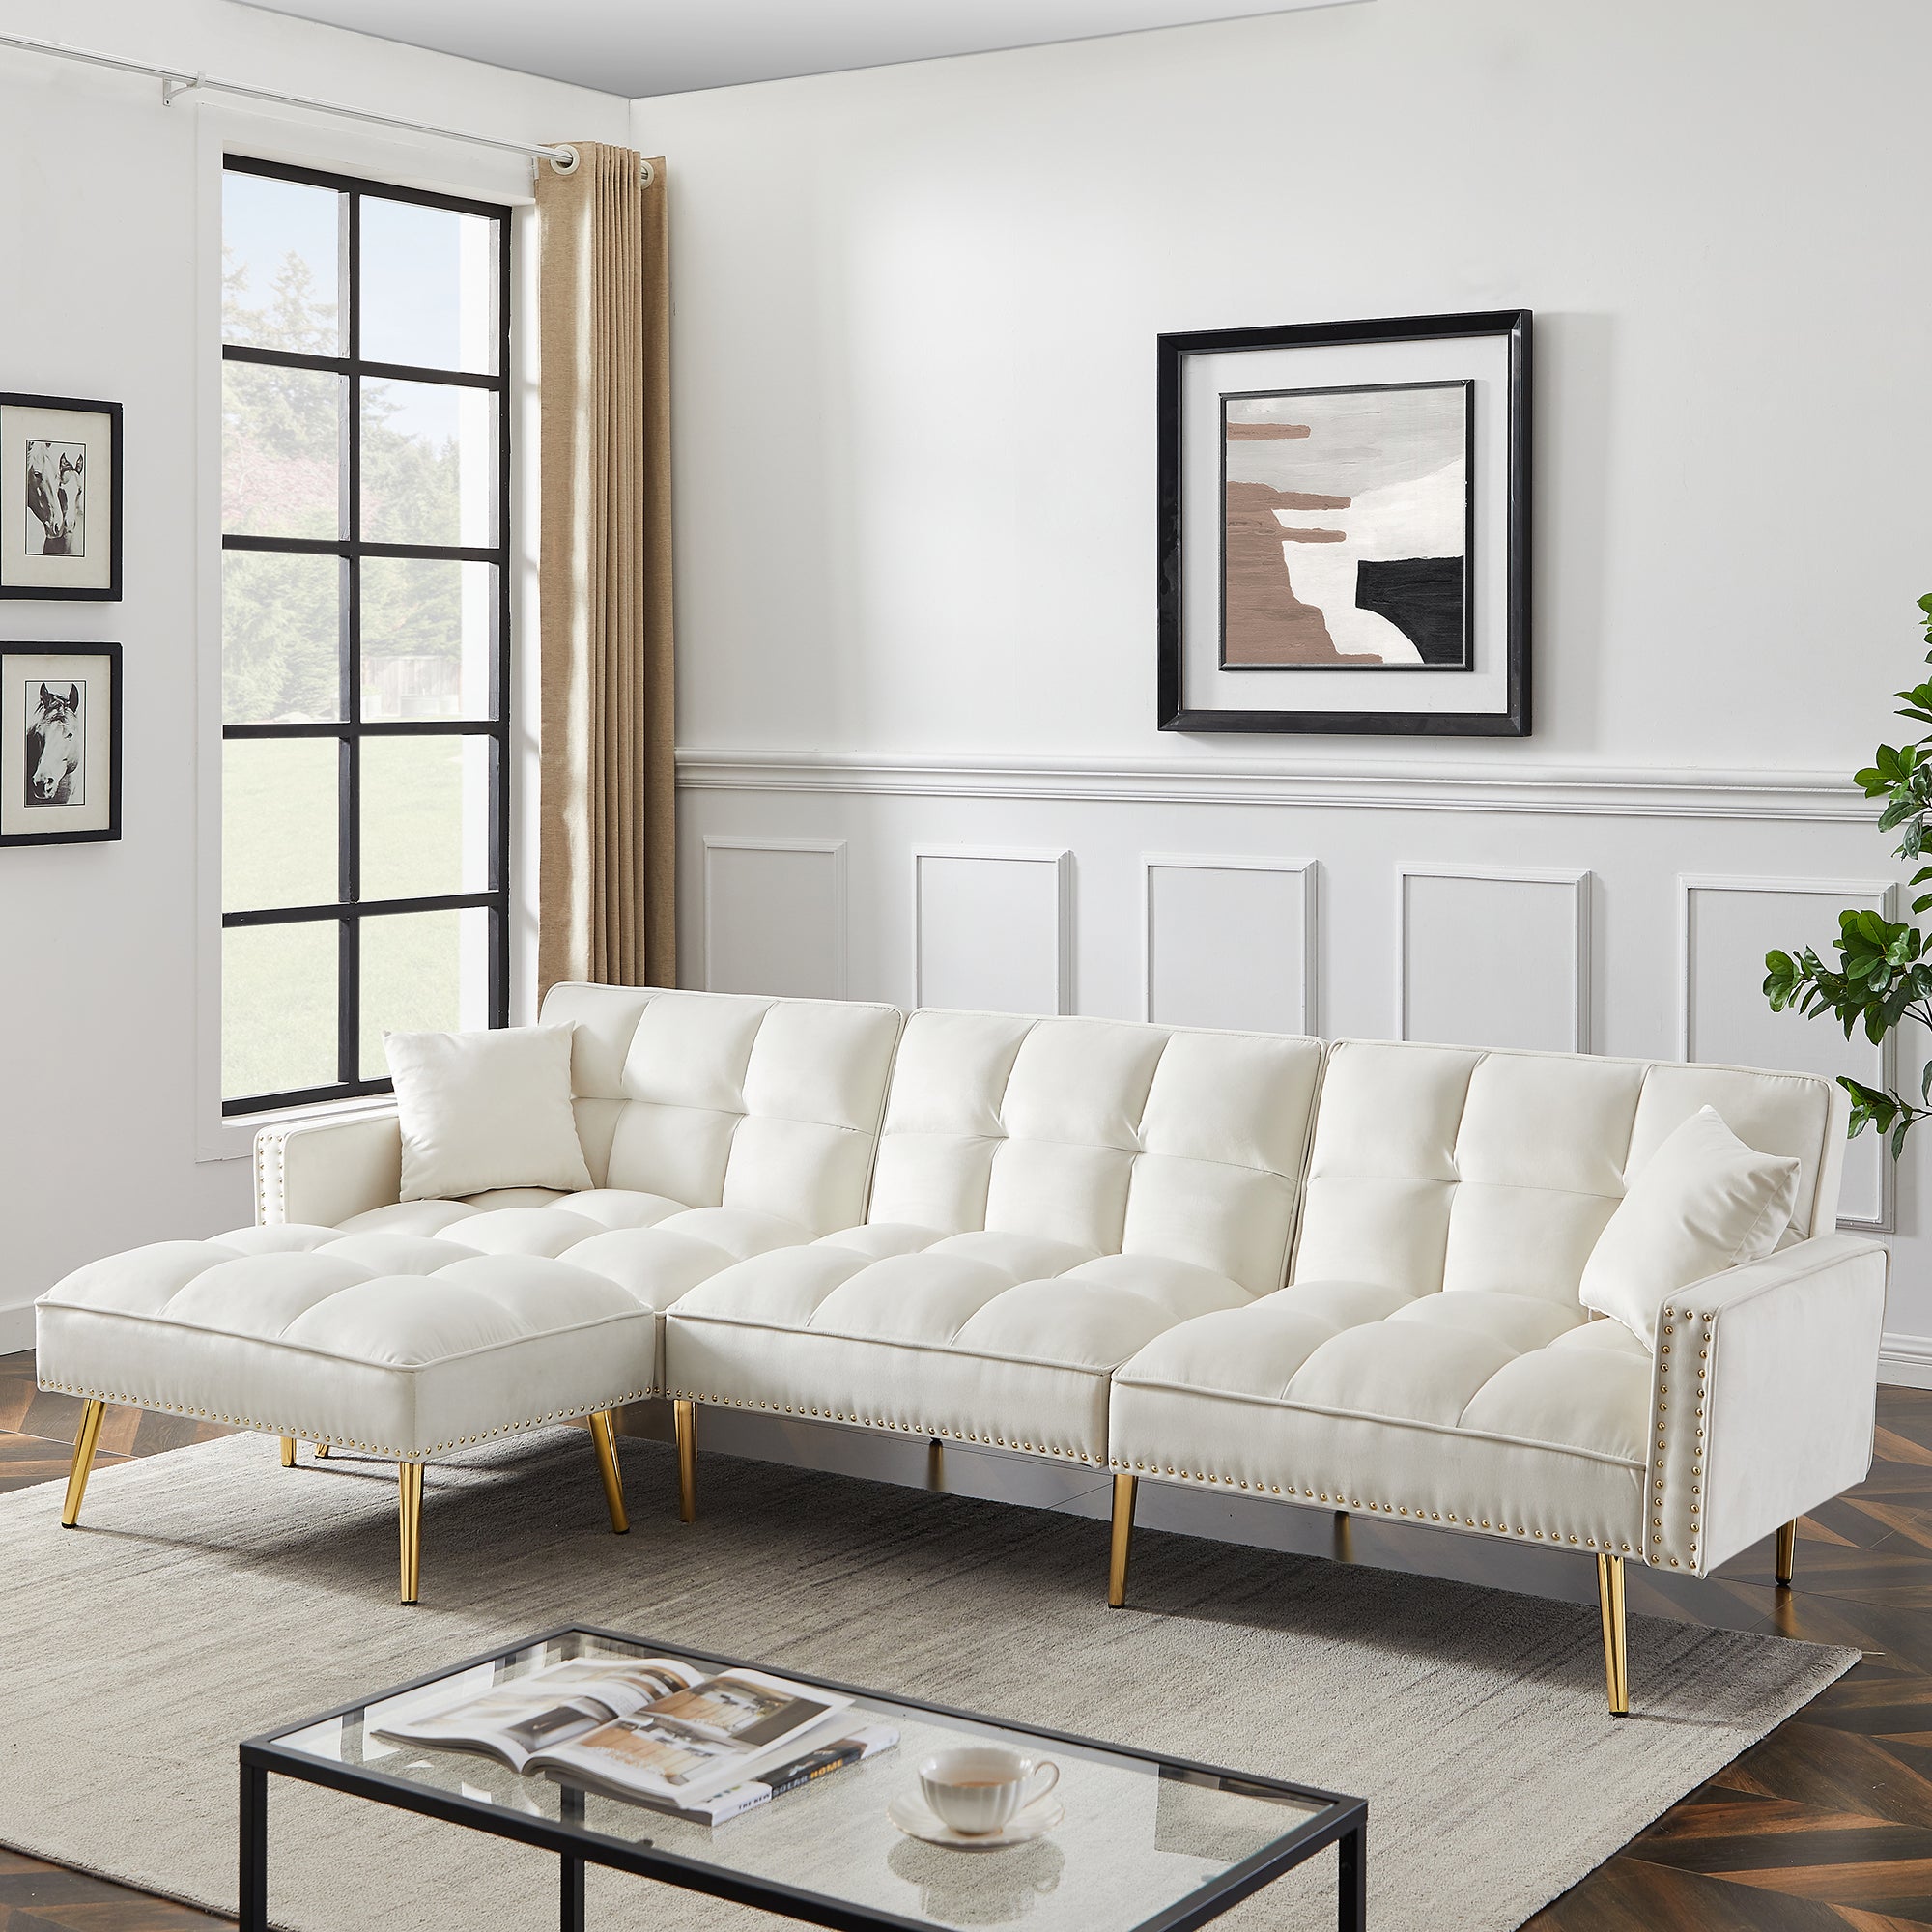 cream white Velvet Upholstered Reversible Sectional Sofa Bed , L-Shaped Couch with Movable Ottoman For Living Room.